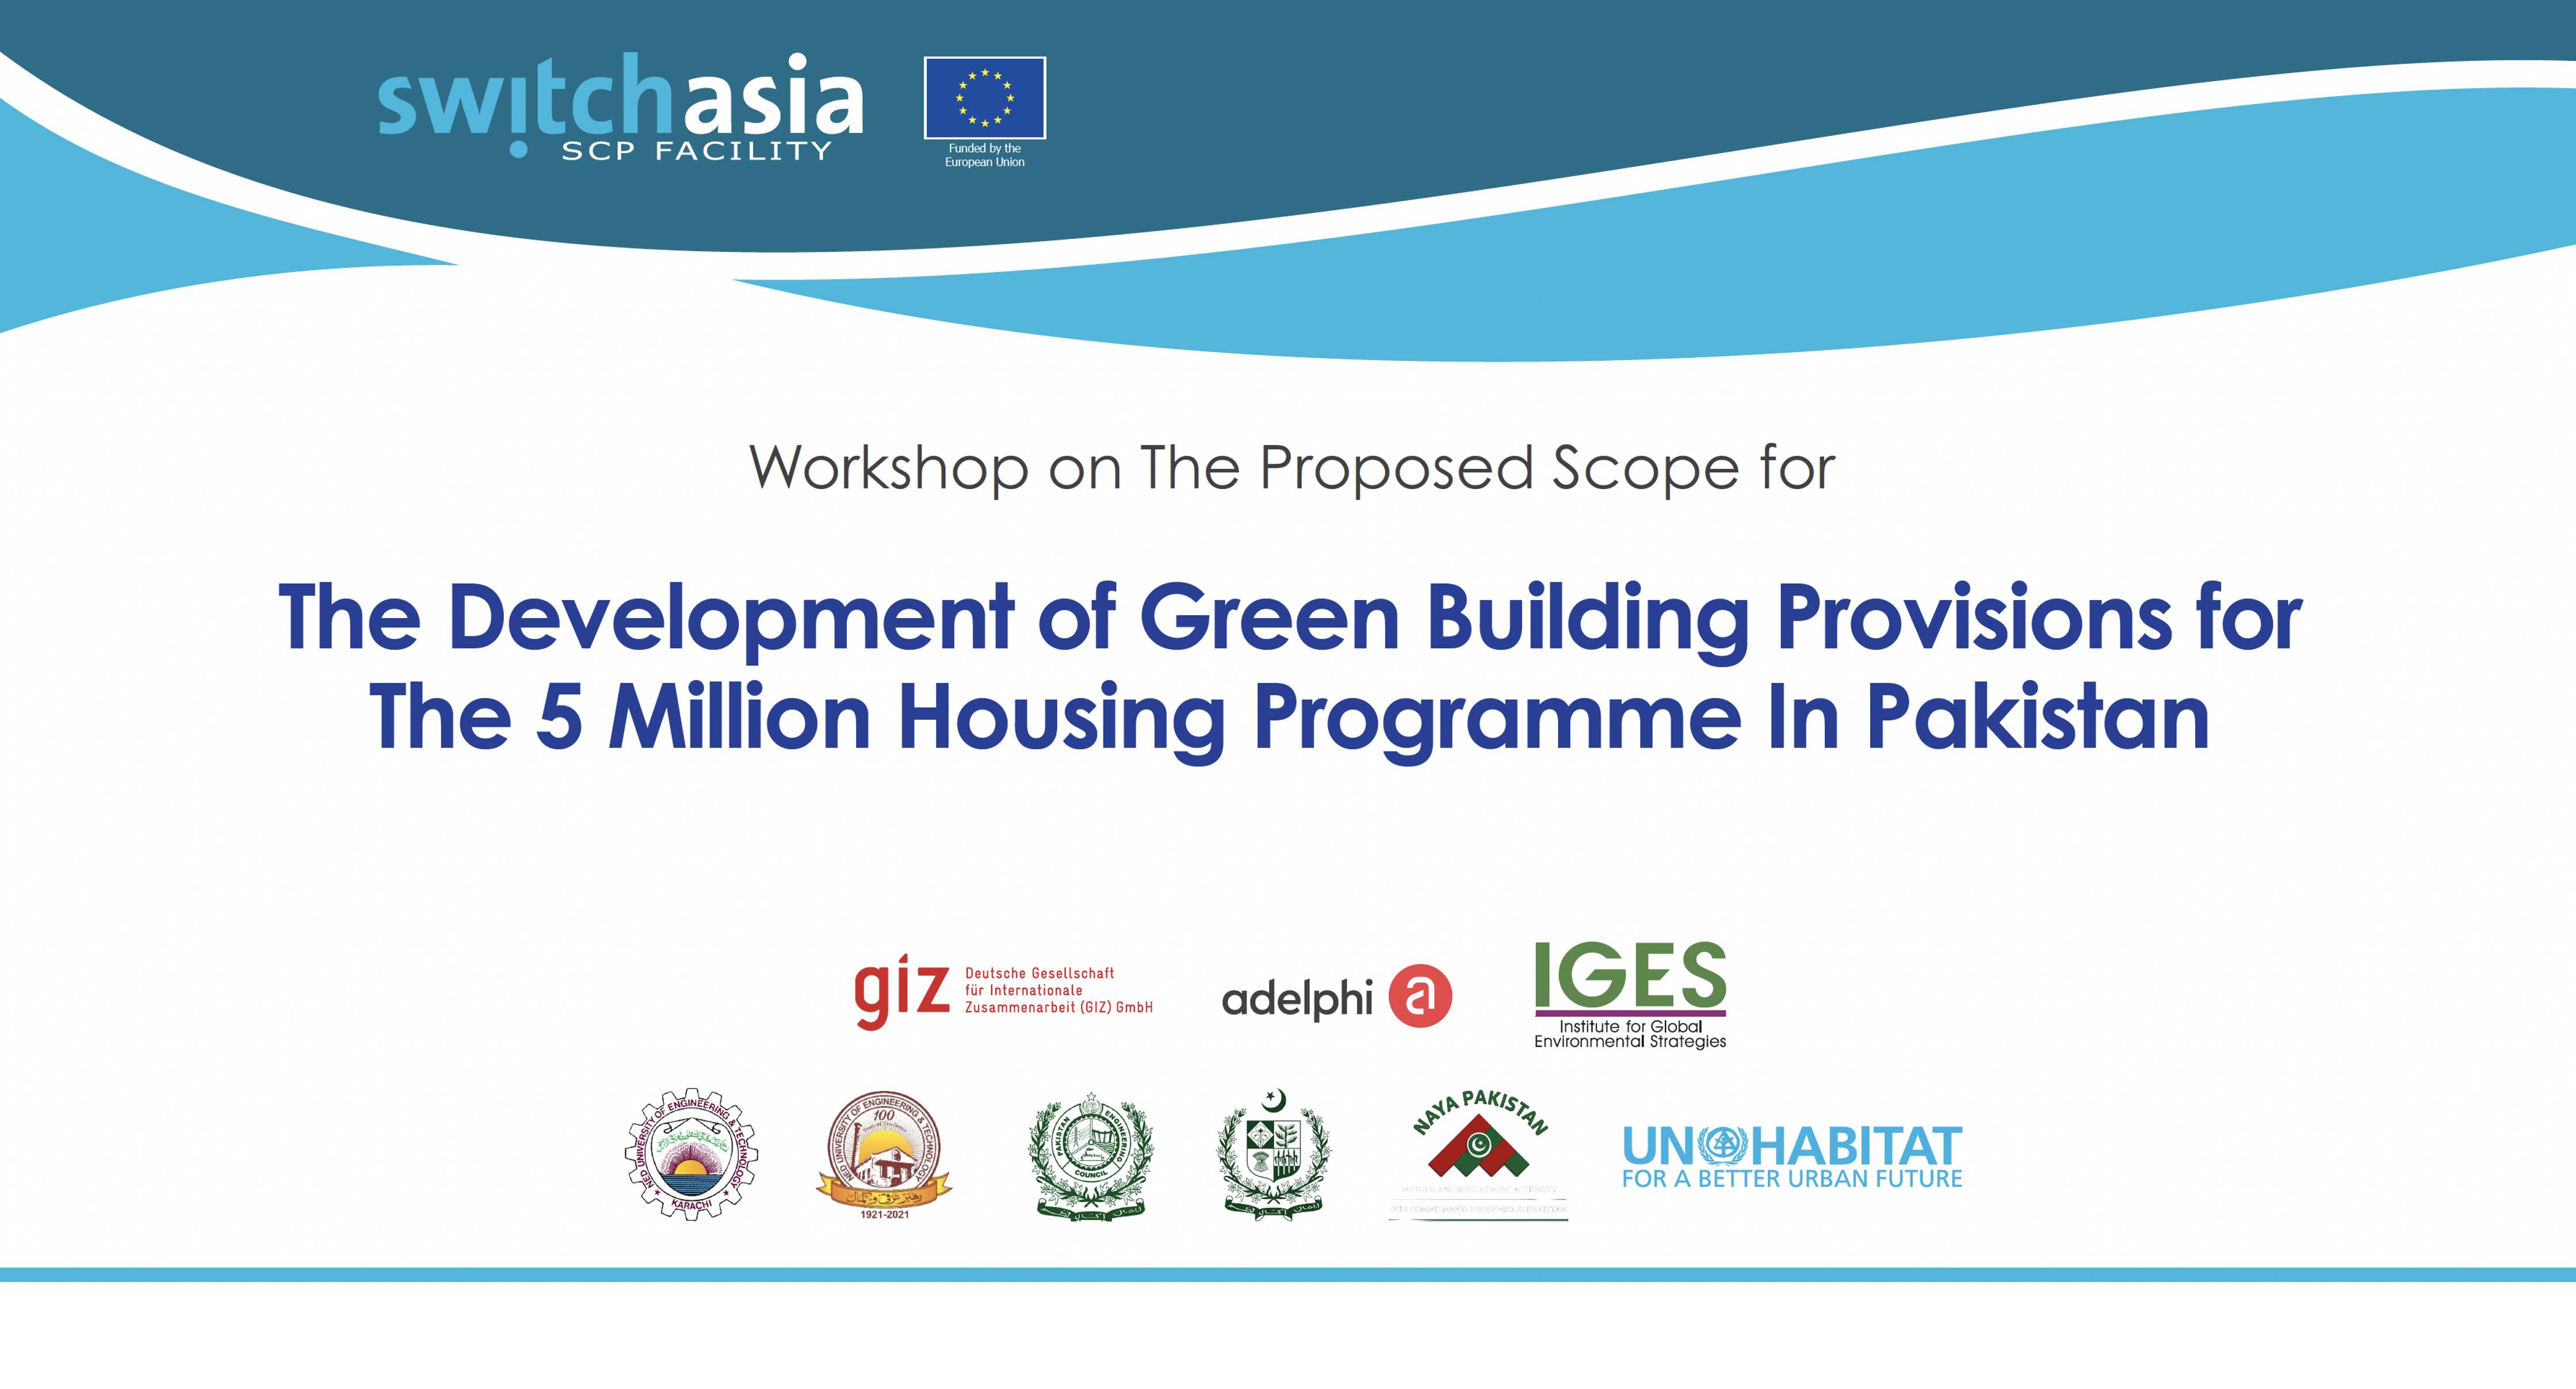 Making the building and housing sector the cornerstone of climate change responses in Pakistan